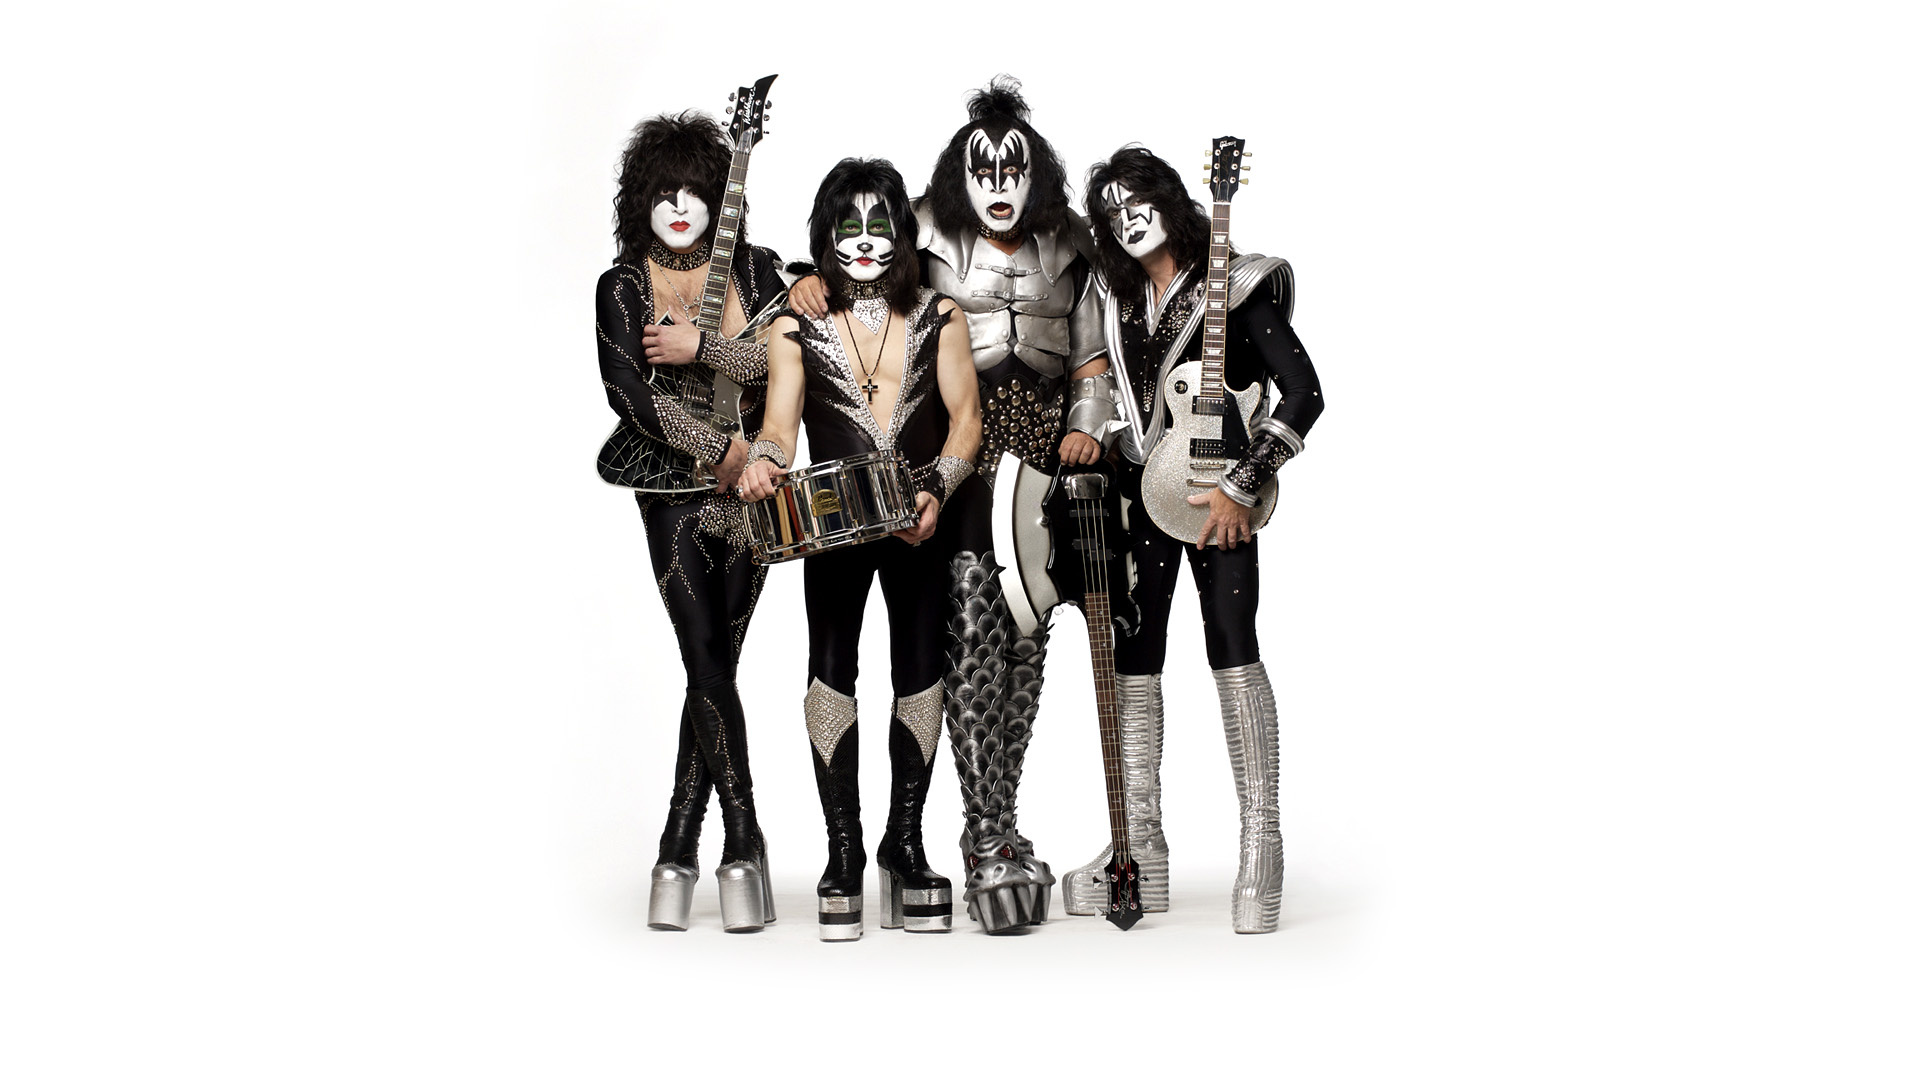 KISS Band, Extensive wallpaper collection, Wide-ranging styles, Diverse visual appeal, 1920x1080 Full HD Desktop